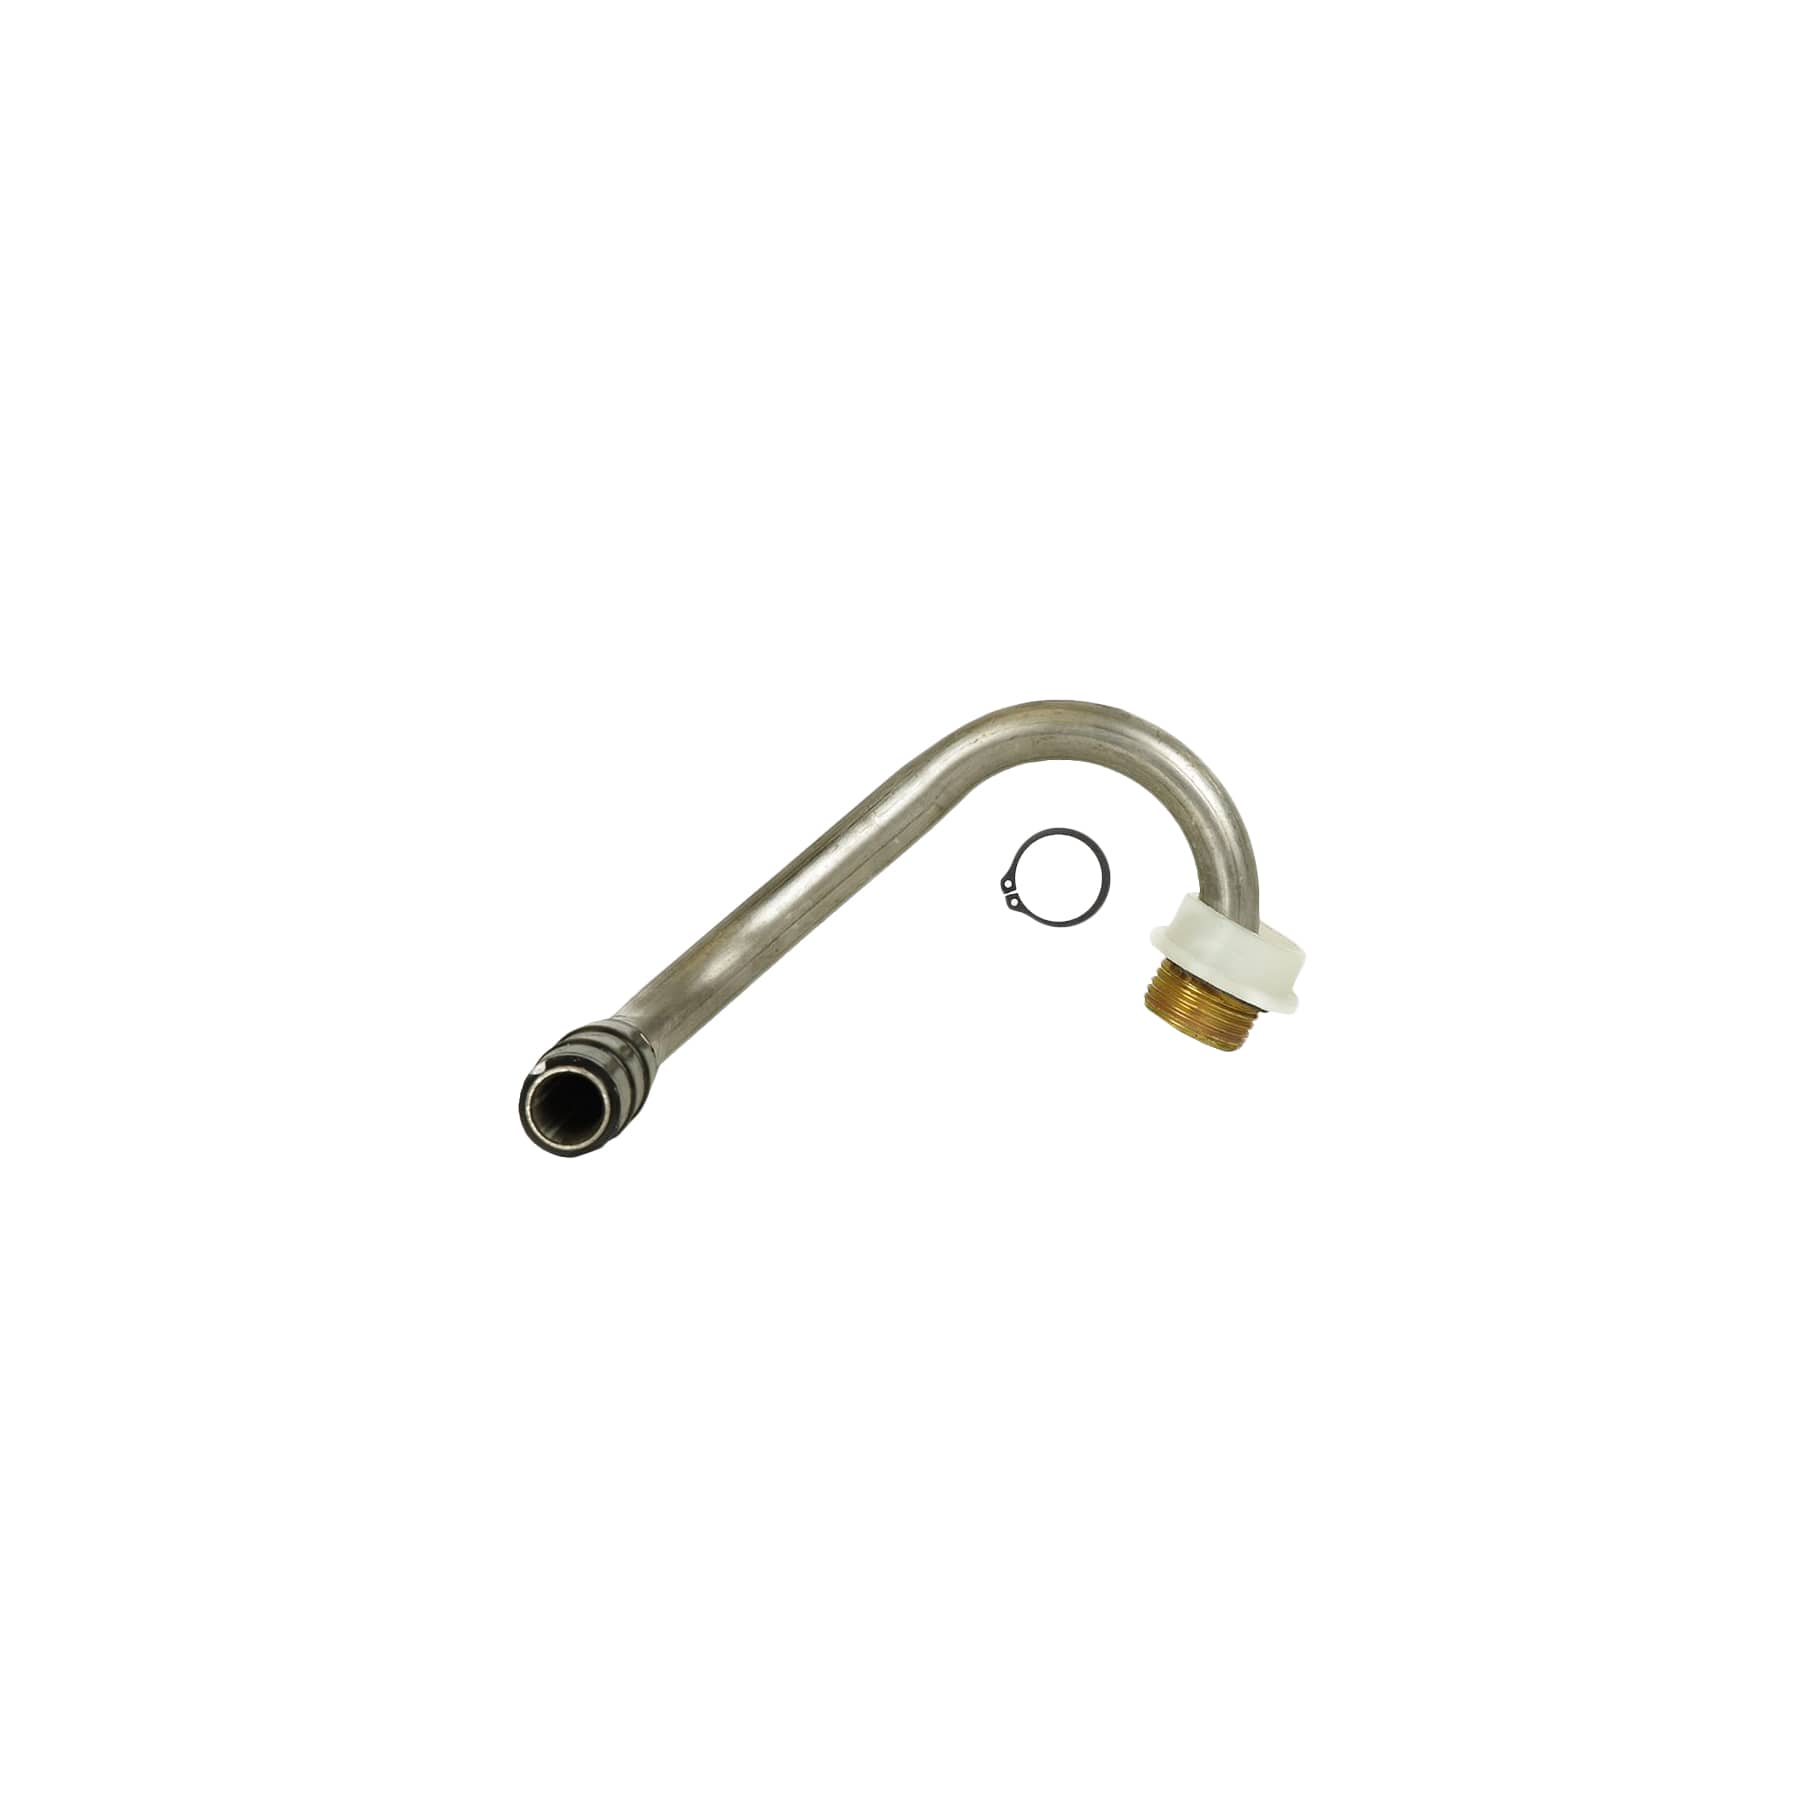 Hose Reel Replacement Parts